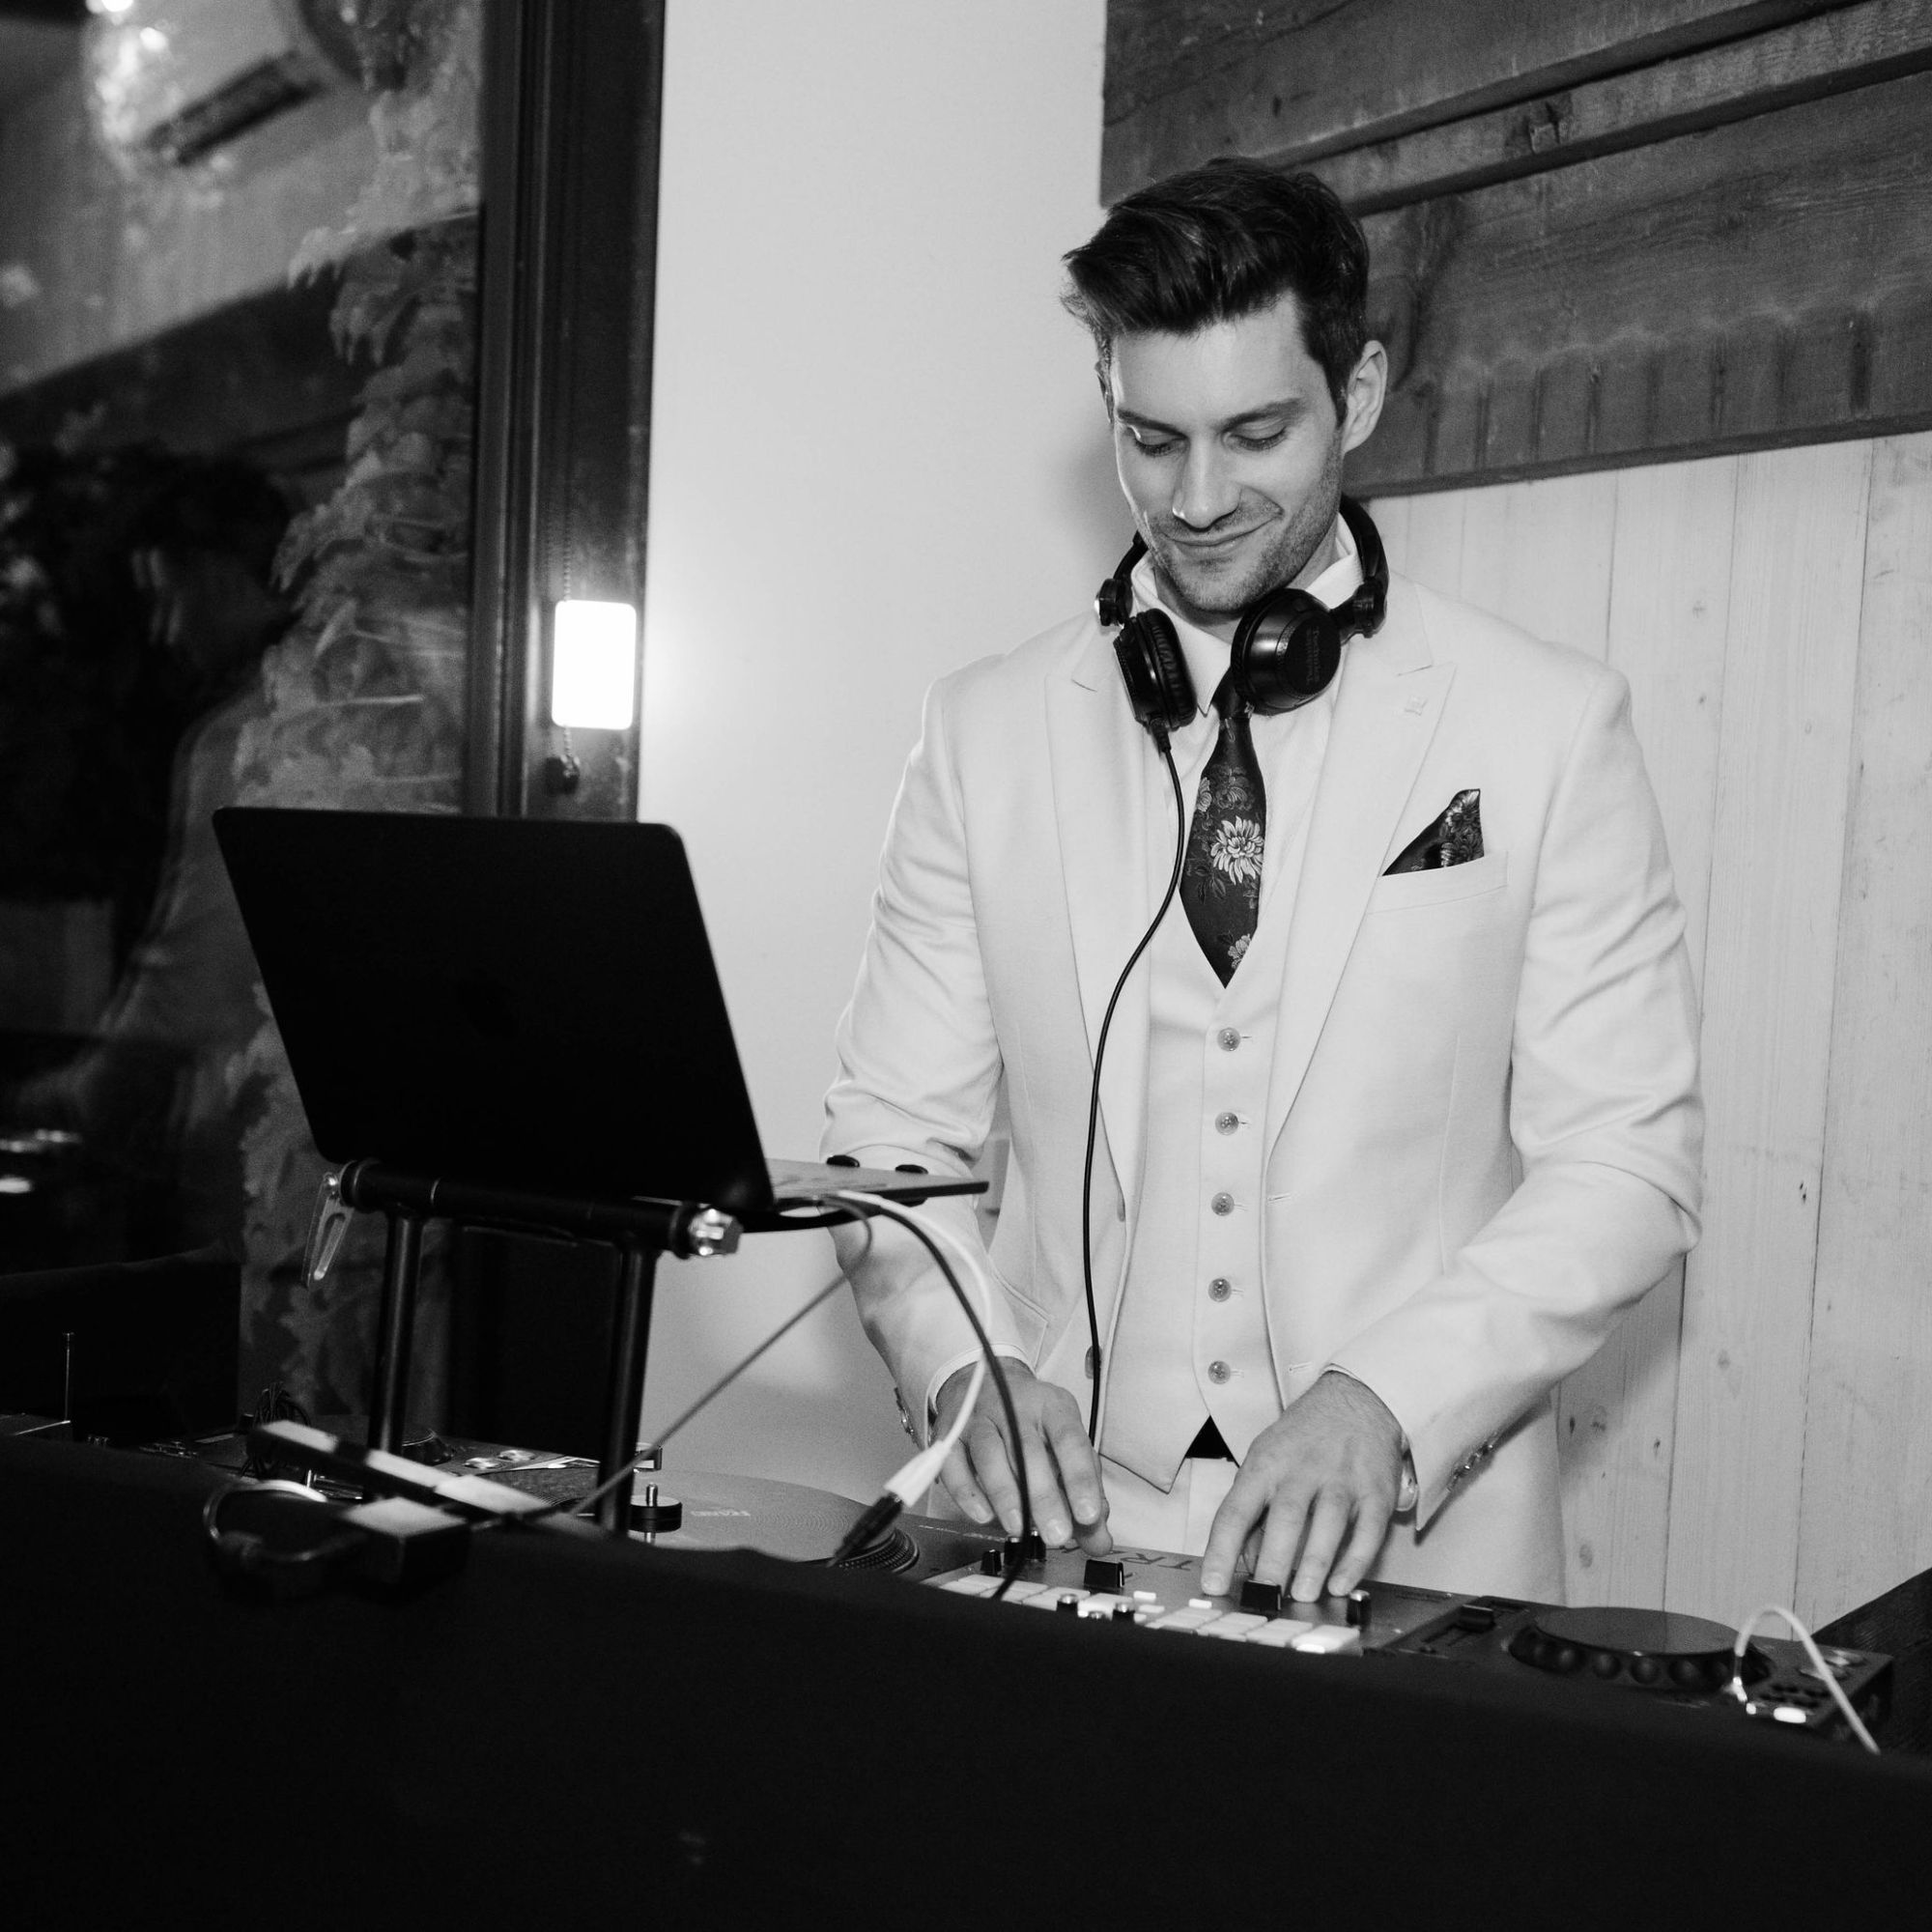 Wedding DJs: Why You Need To Hire A DJ for Your Special Day